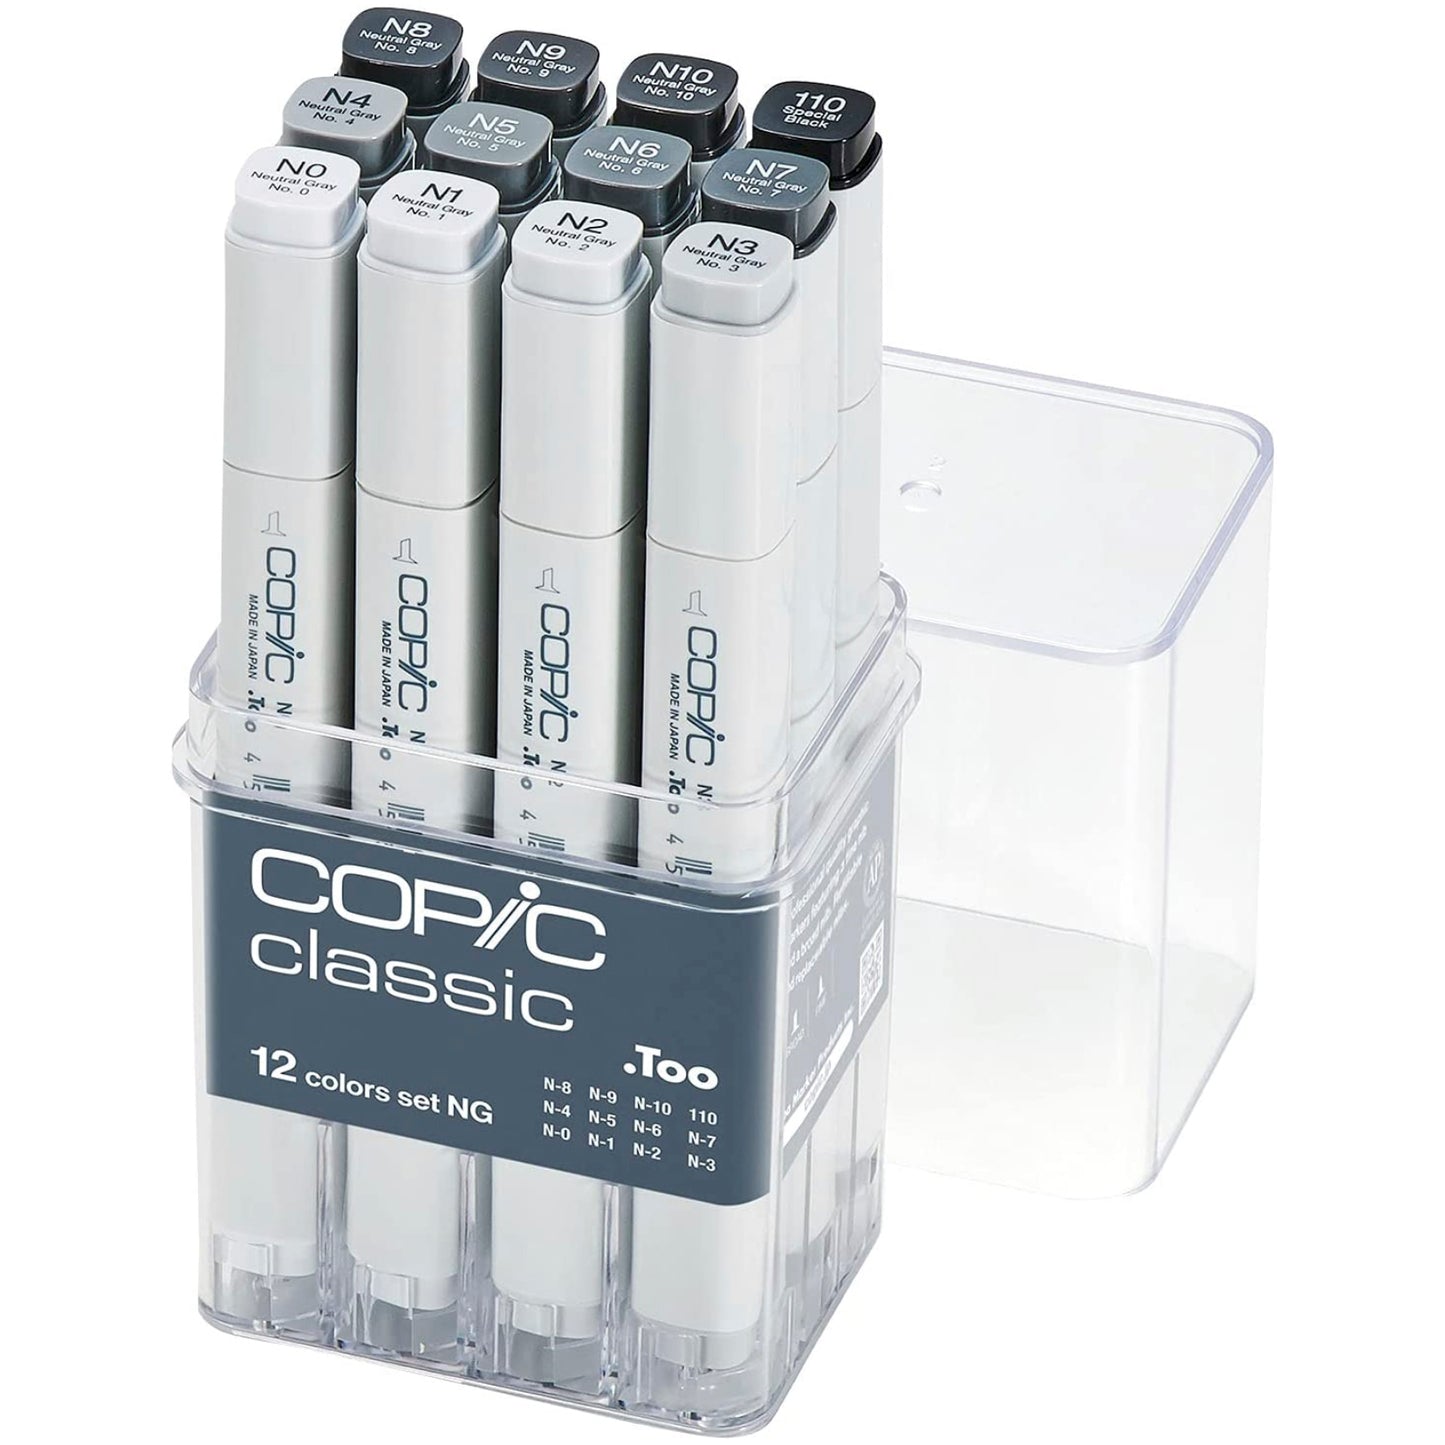 Copic Classic Marker Set - 12NG Neutral Gray - by Copic - K. A. Artist Shop